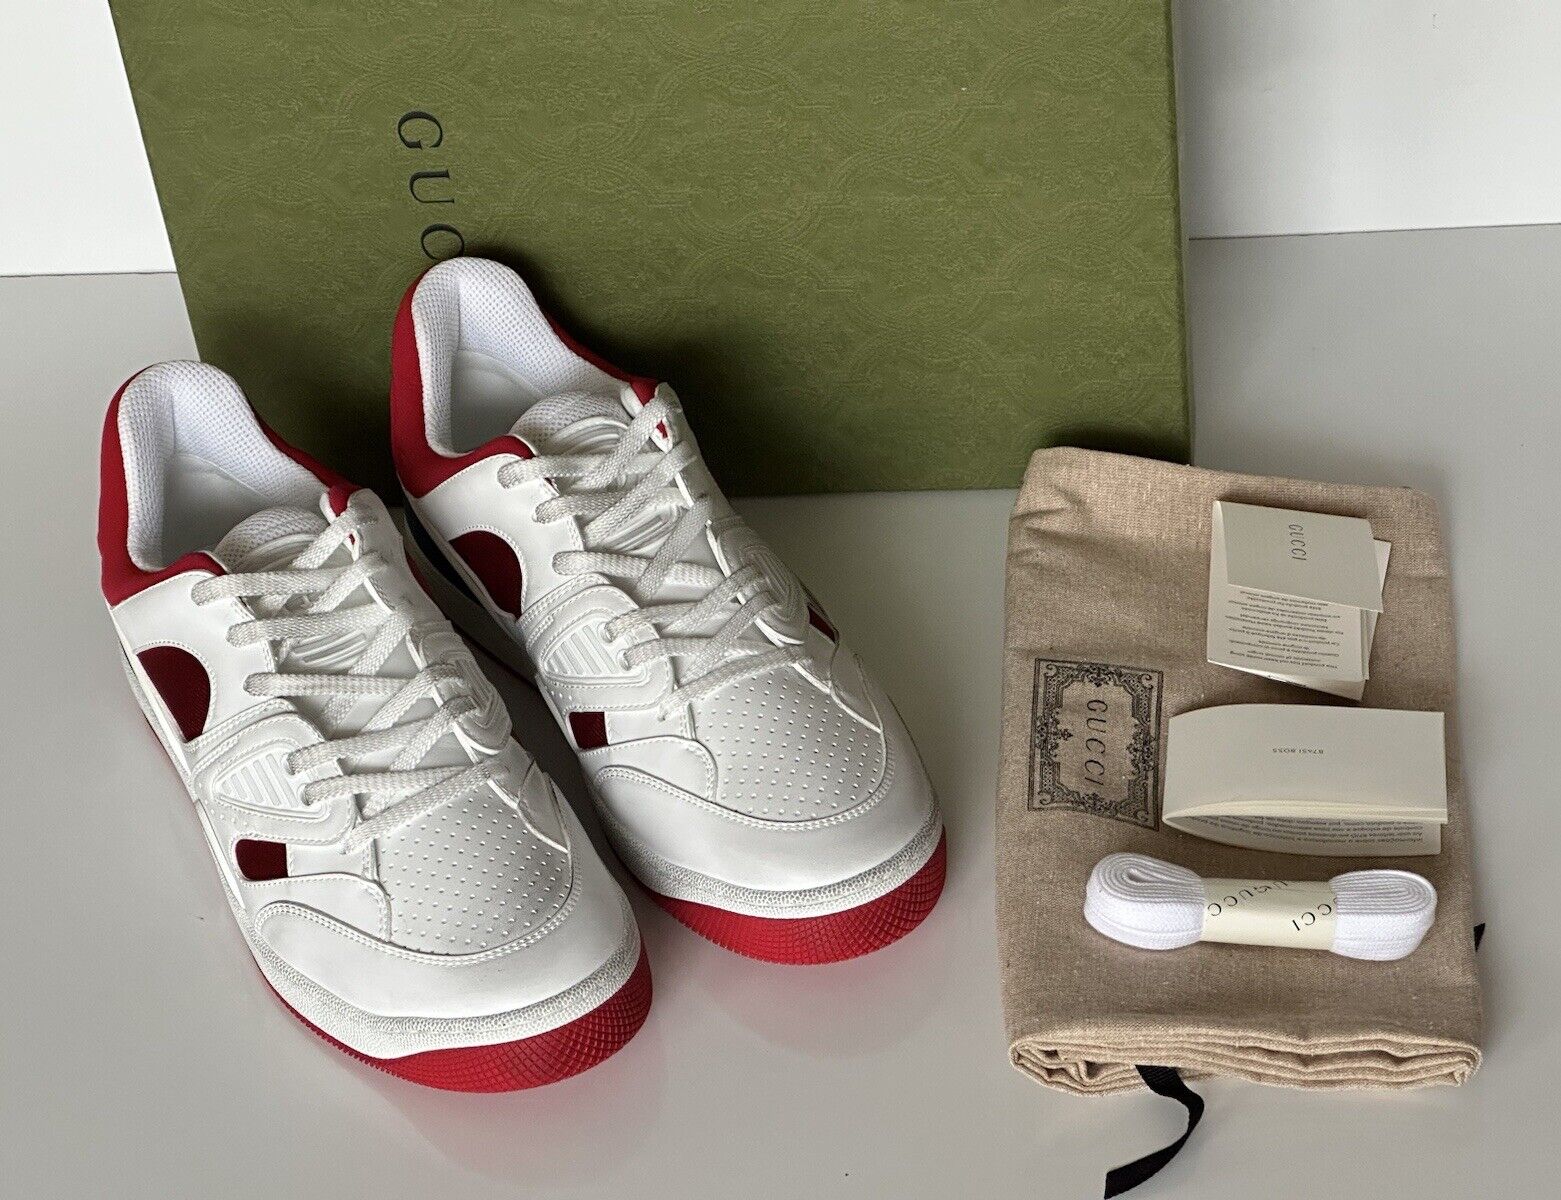 NIB Gucci Men's Low-top White/Red Leather Sneakers 10.5 US (Gucci 10G) 697882 IT